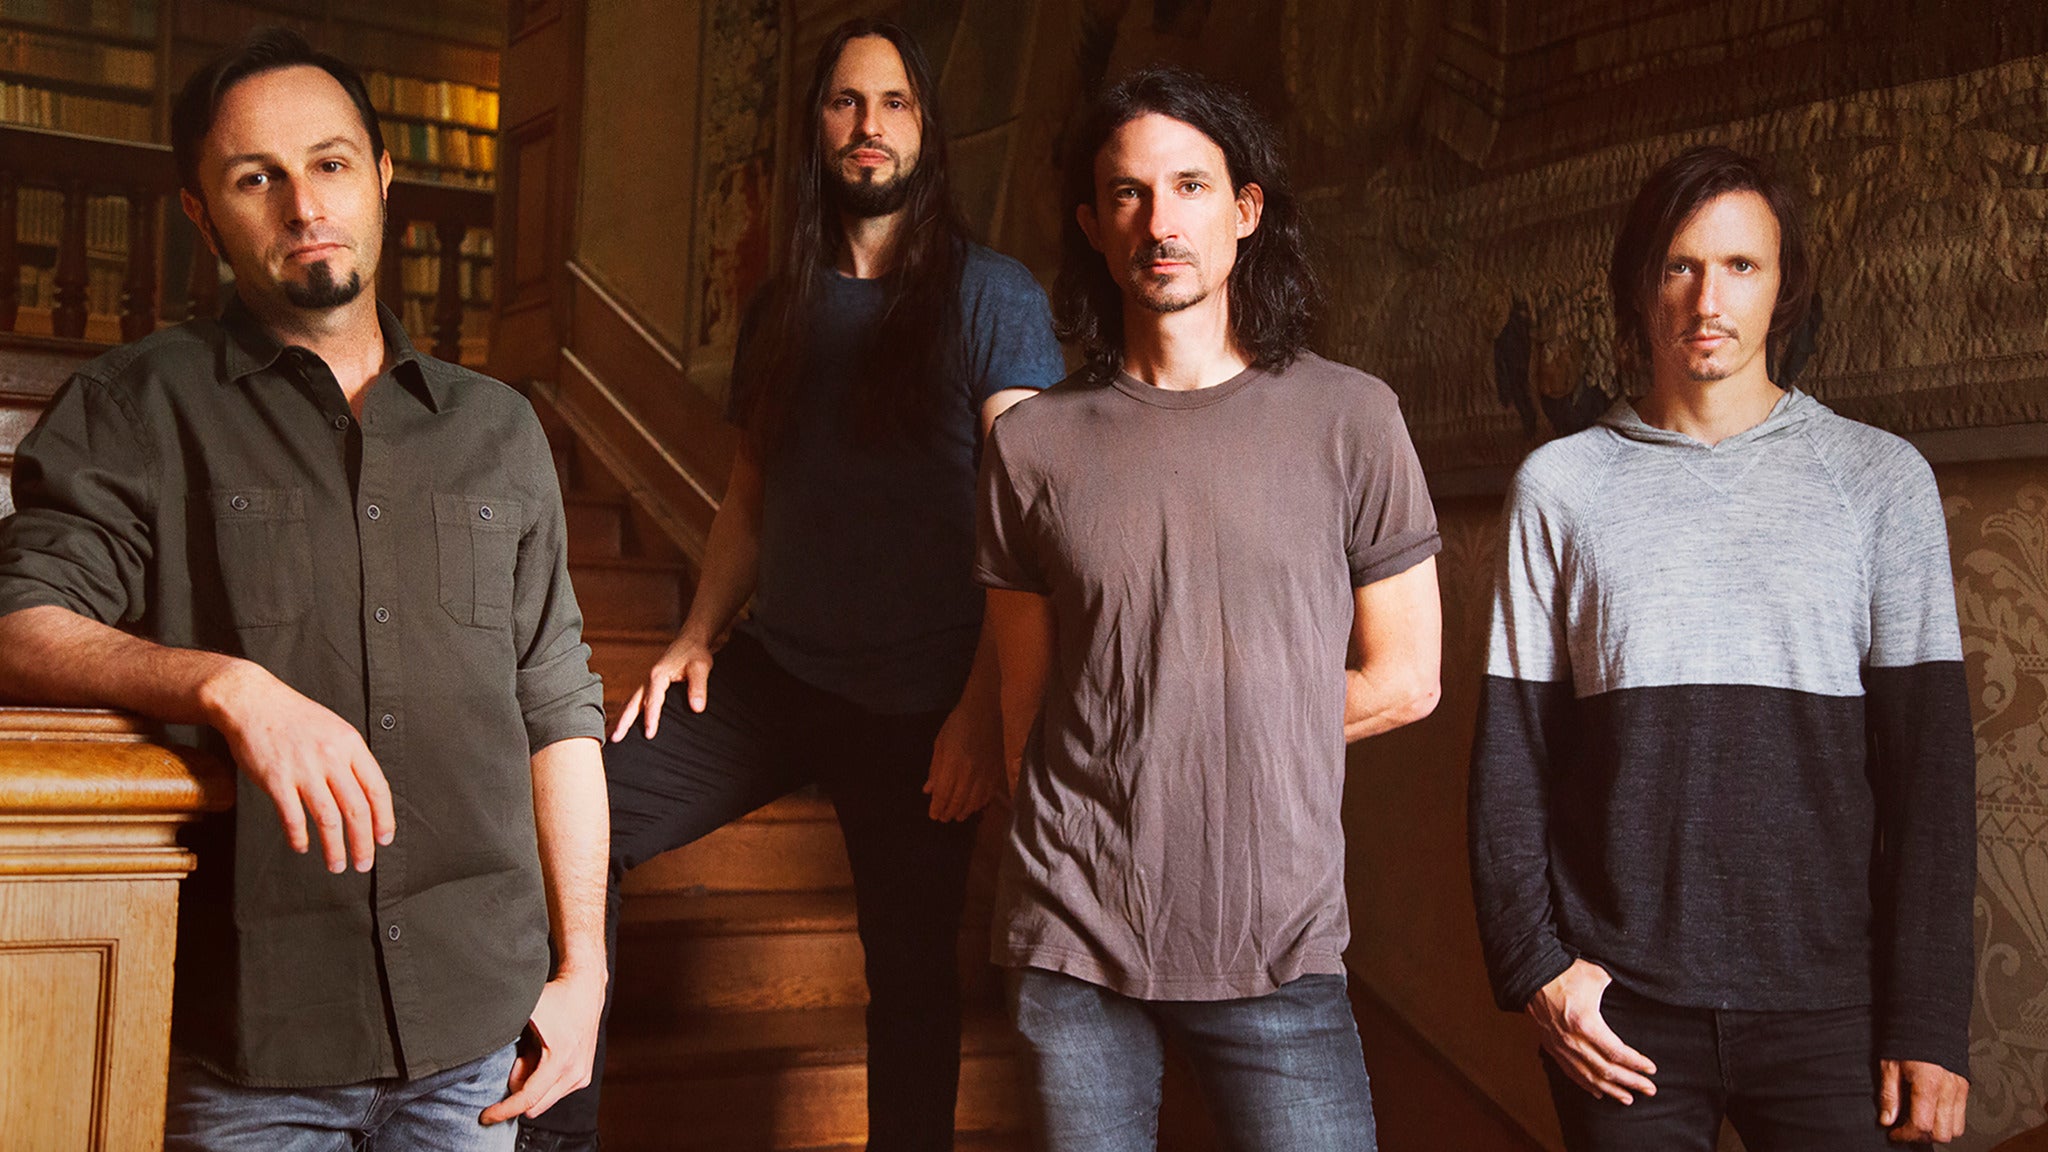 Gojira presale code for early tickets in Rochester